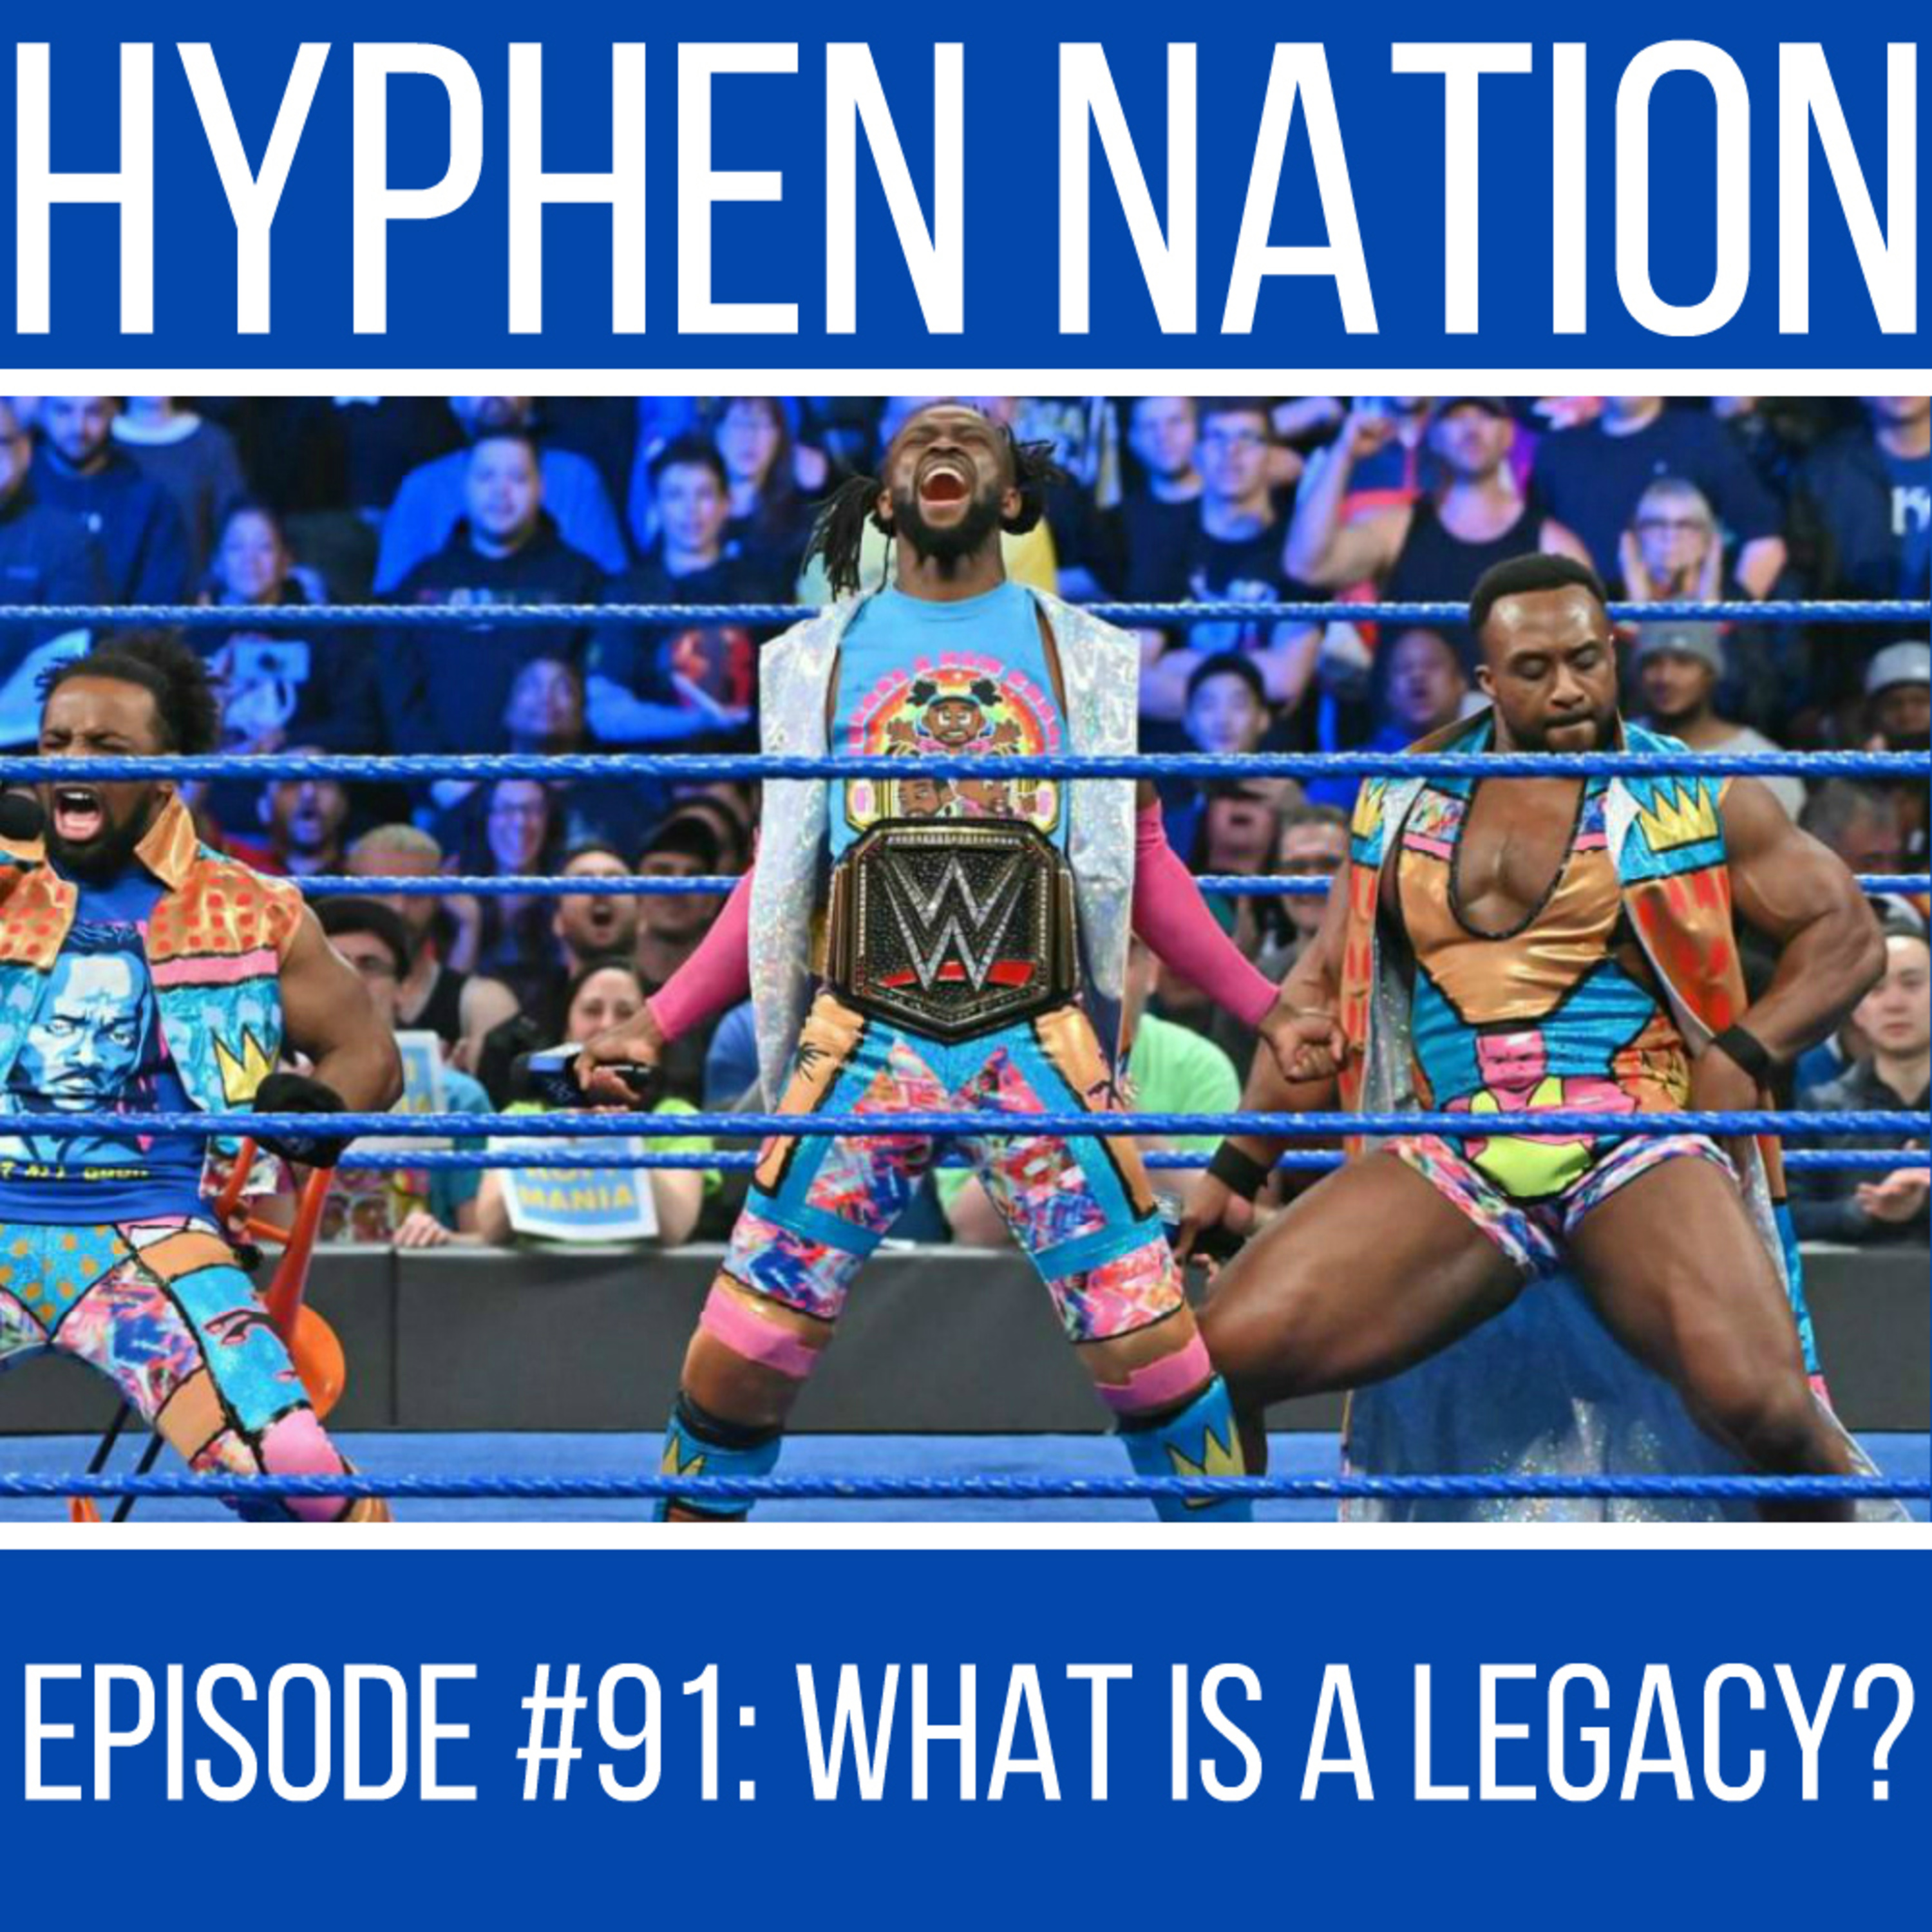 Episode #91: What Is A Legacy?